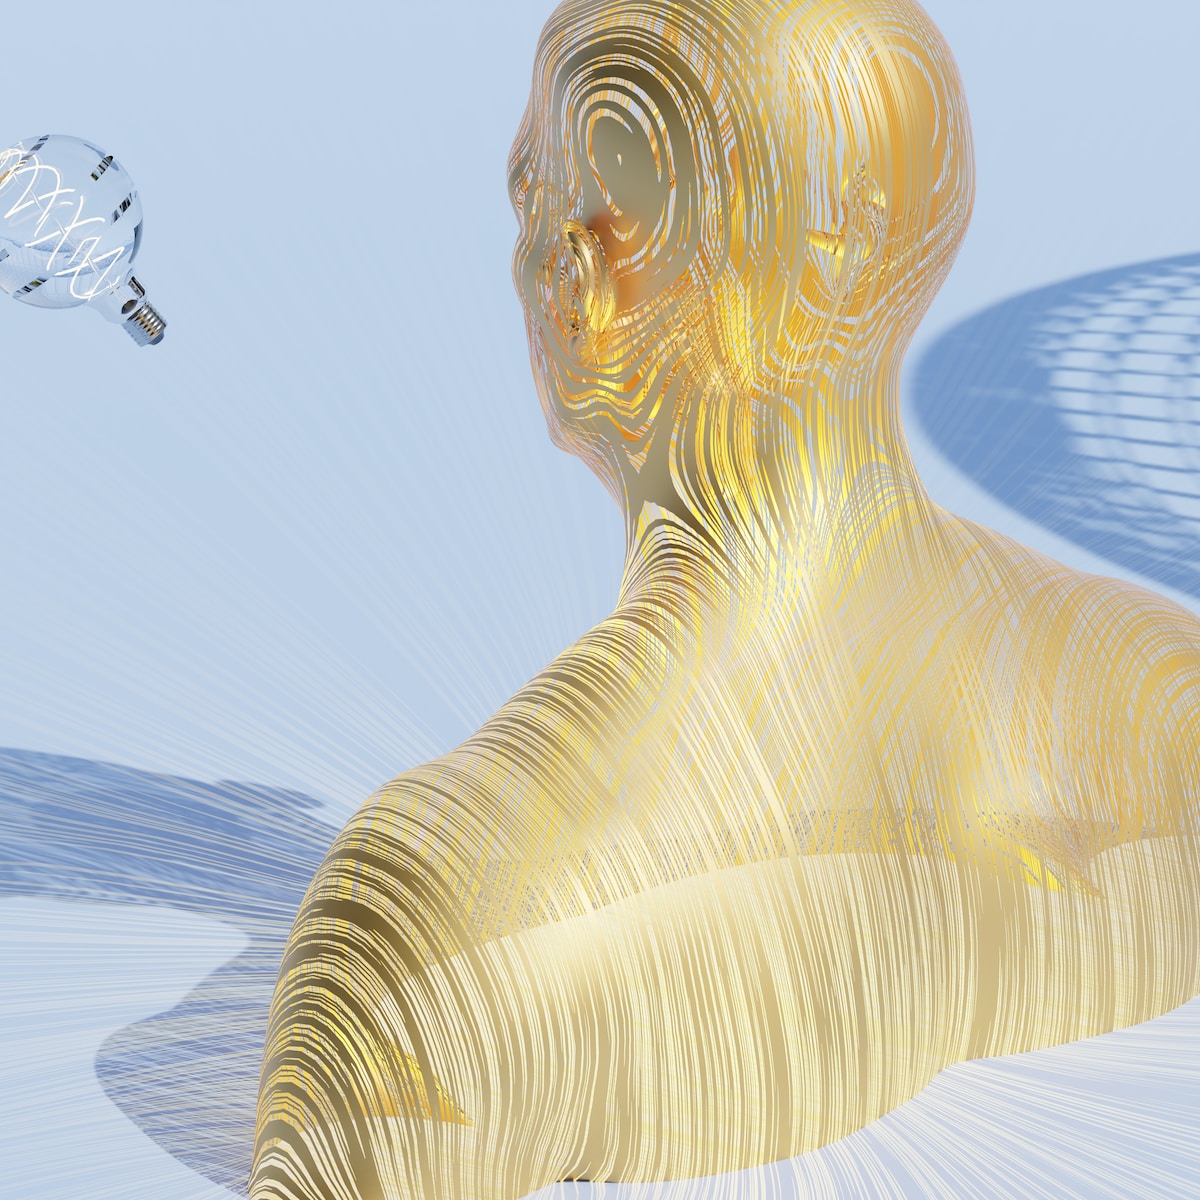 a digital image of a person's head and a light bulb